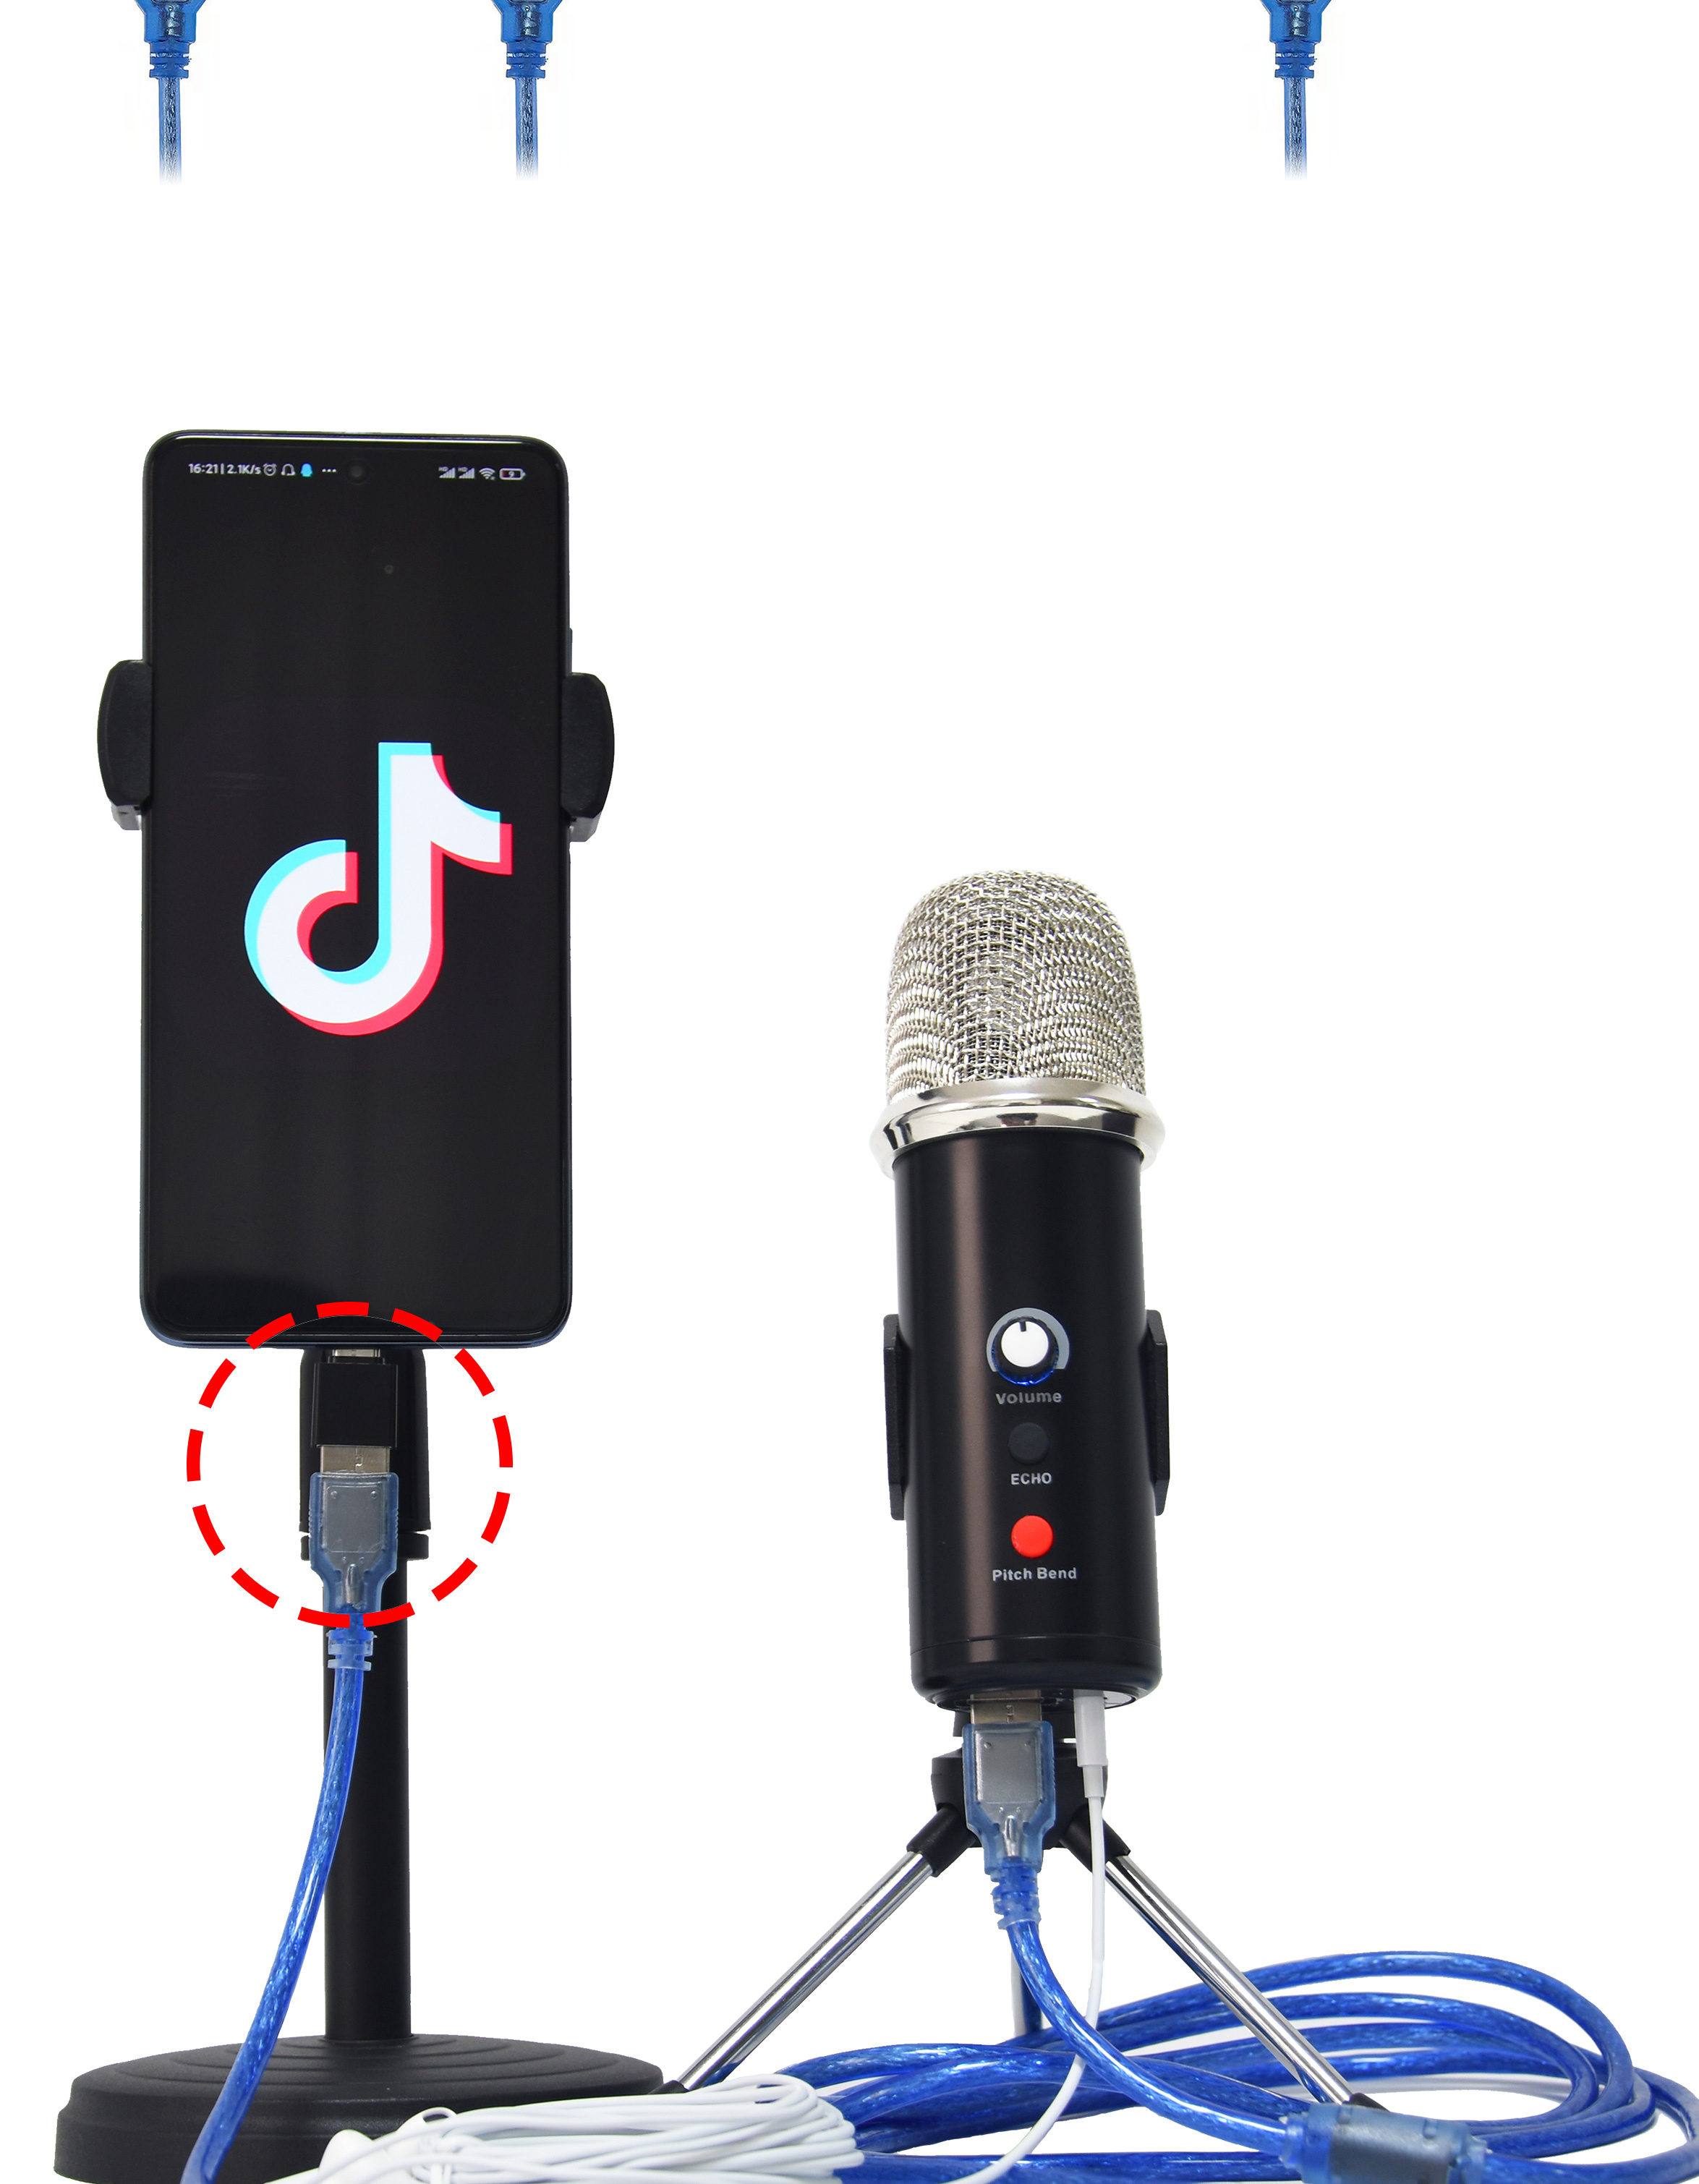 Studio Professional Condenser Microphone USB Microphone for Mobile Phone Video Recording Live Broadcast